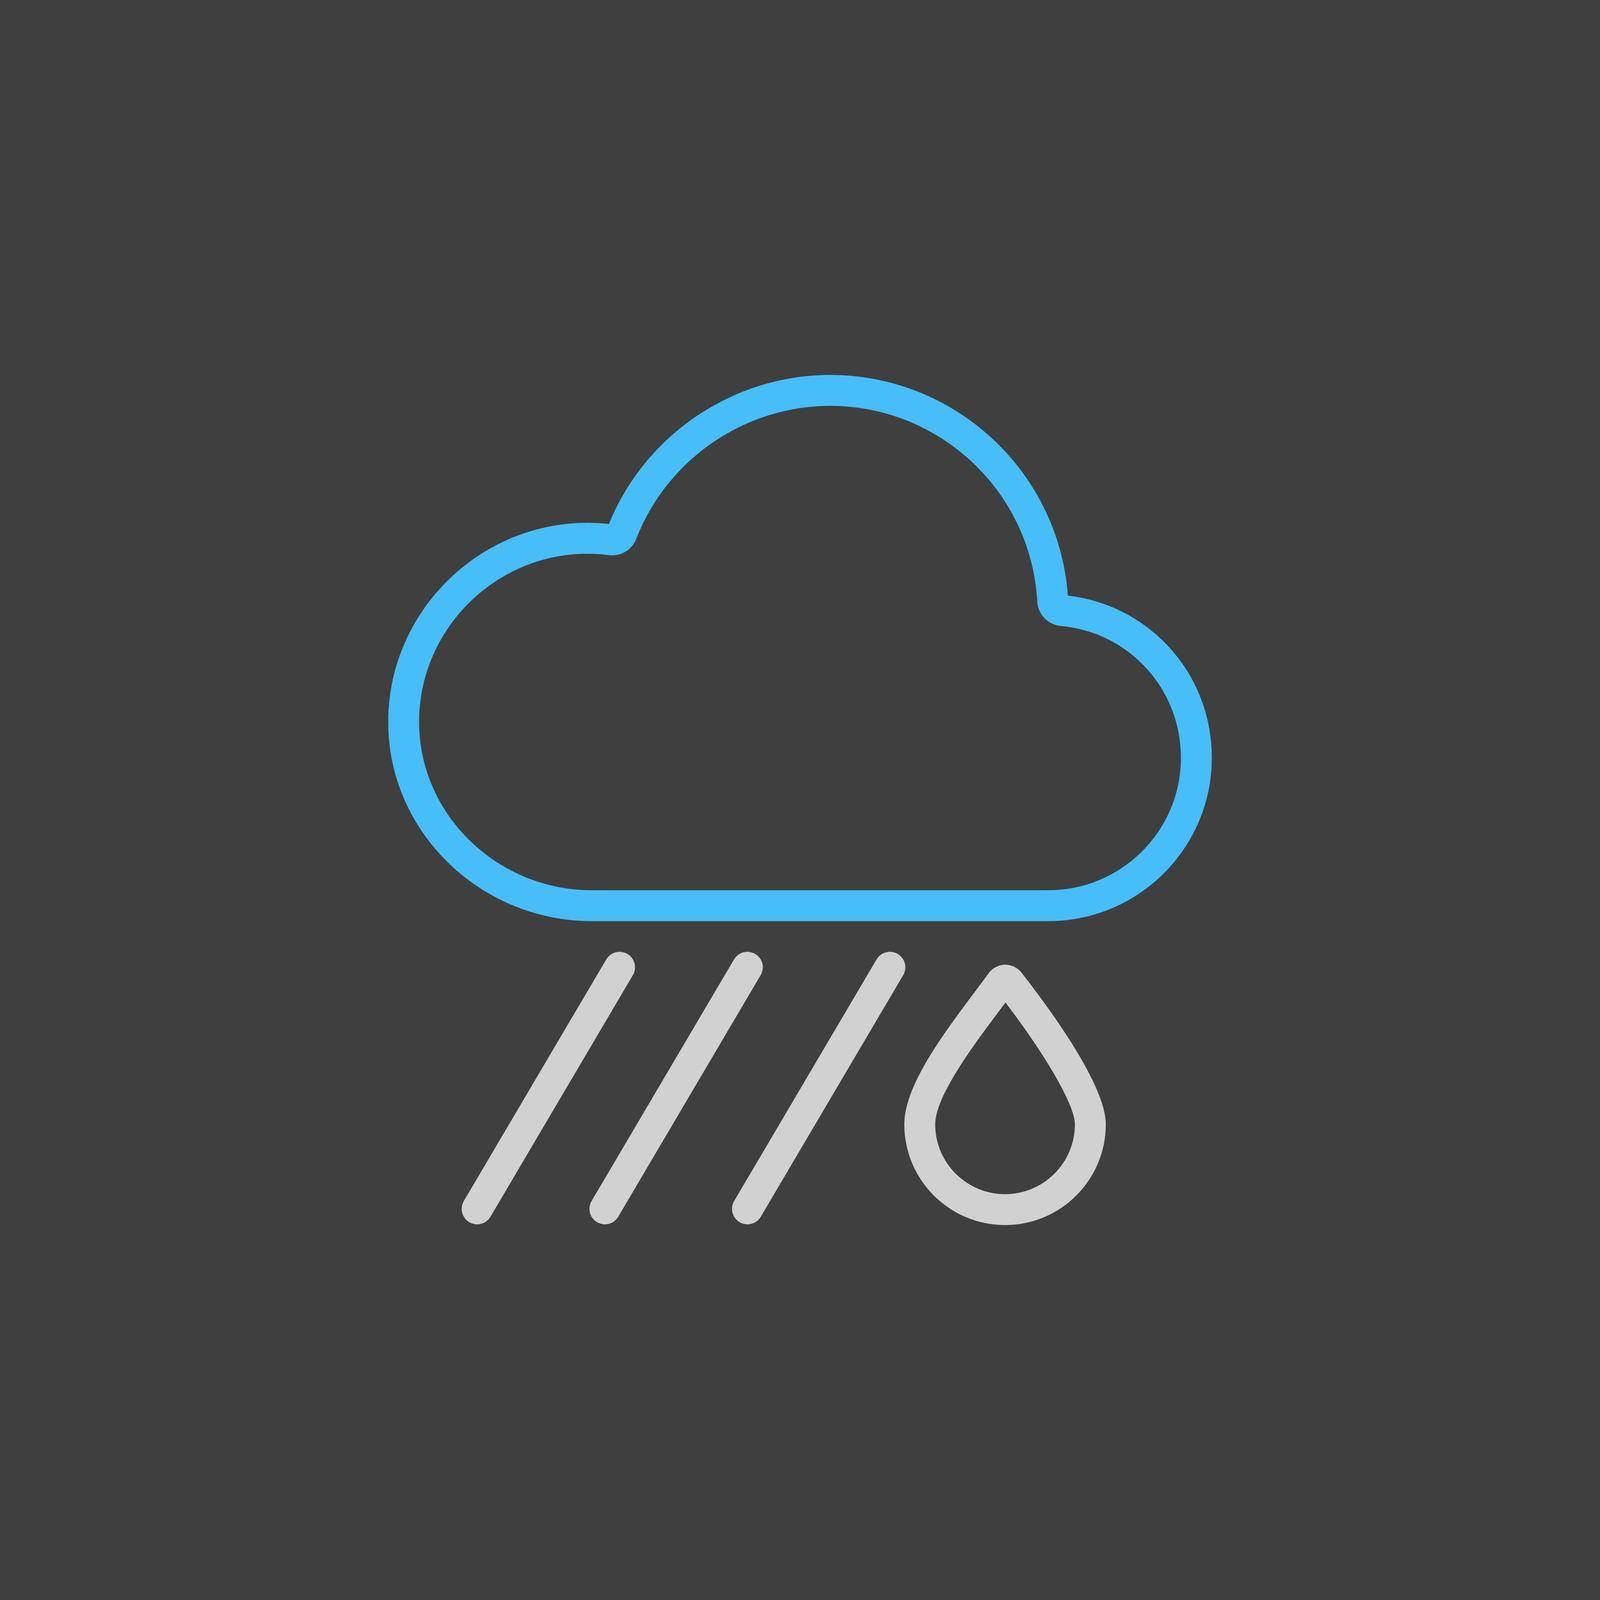 Raincloud with raindrop vector icon on dark background. Meteorology sign. Graph symbol for travel, tourism and weather web site and apps design, UI